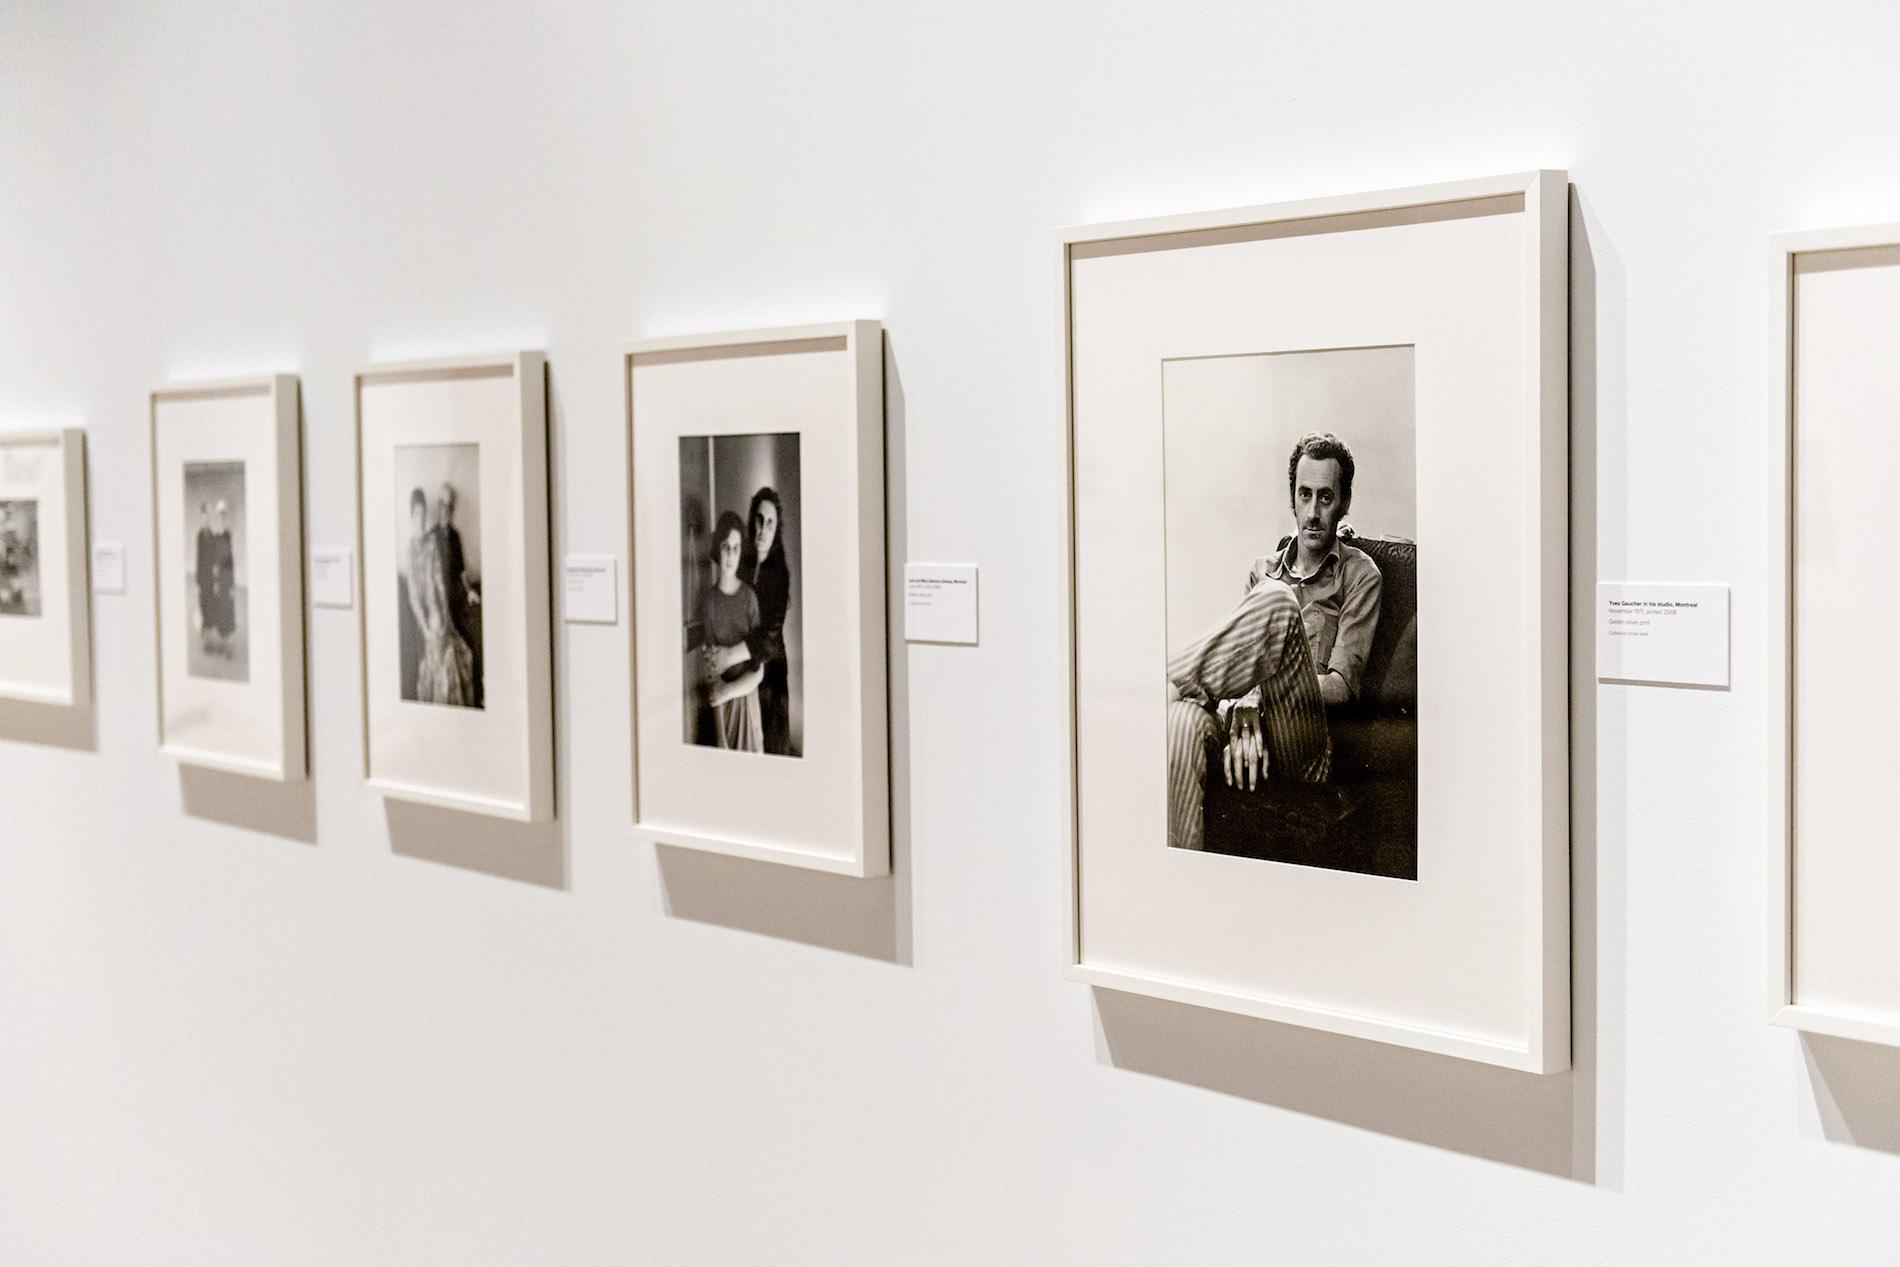 Black and white photographs in white frames, evenly spaced on a white wall